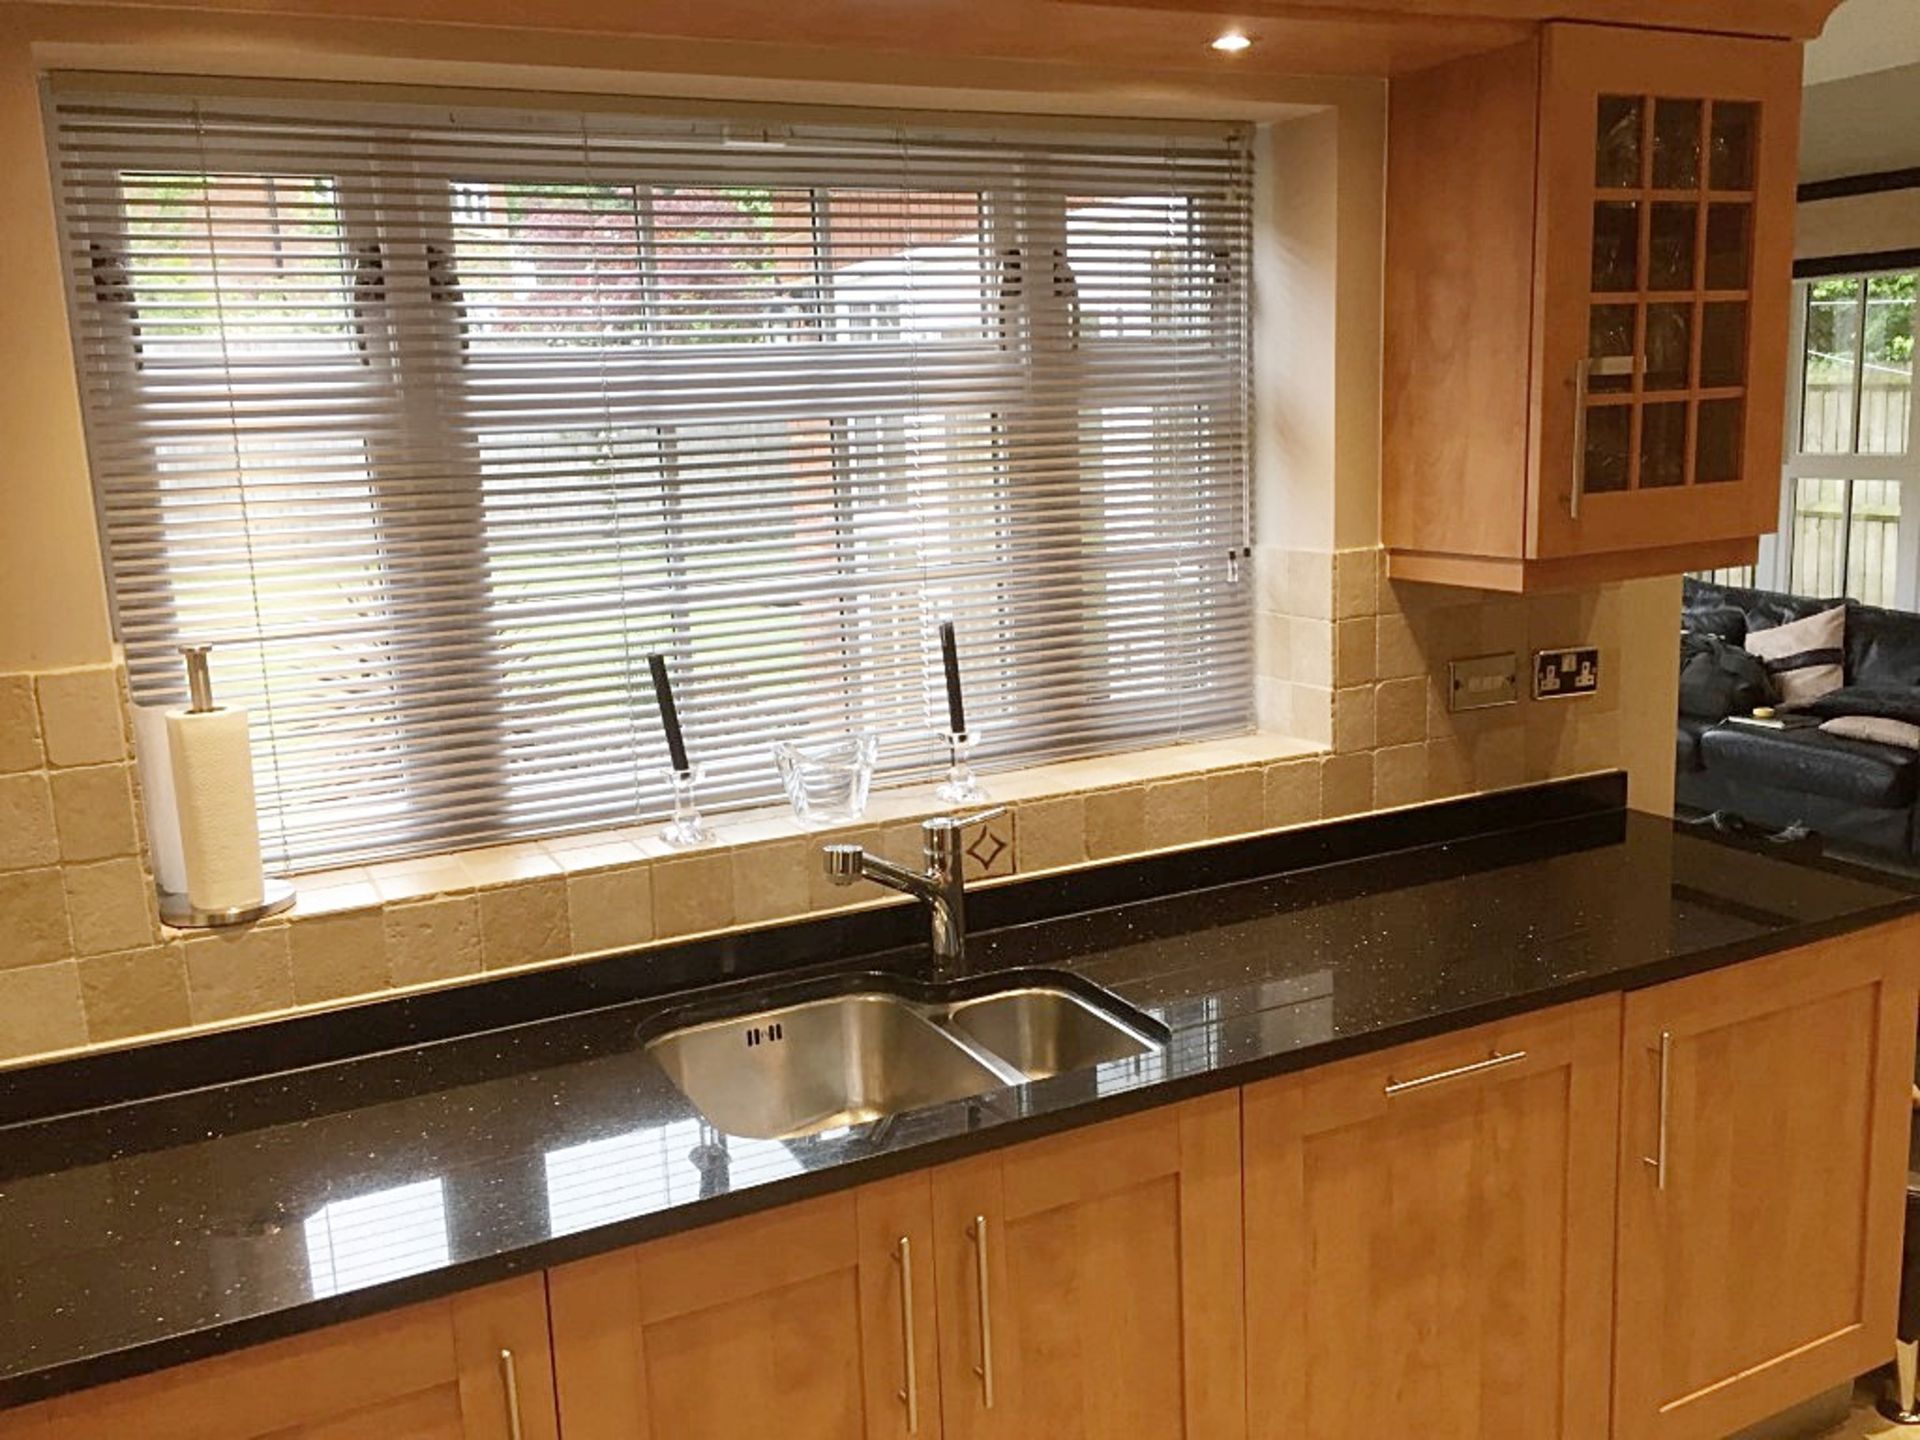 1 x Gemini Fitted Kitchen With Granite Worktops, Integrated AEG Appliances, And Utility Area - CL130 - Image 16 of 31